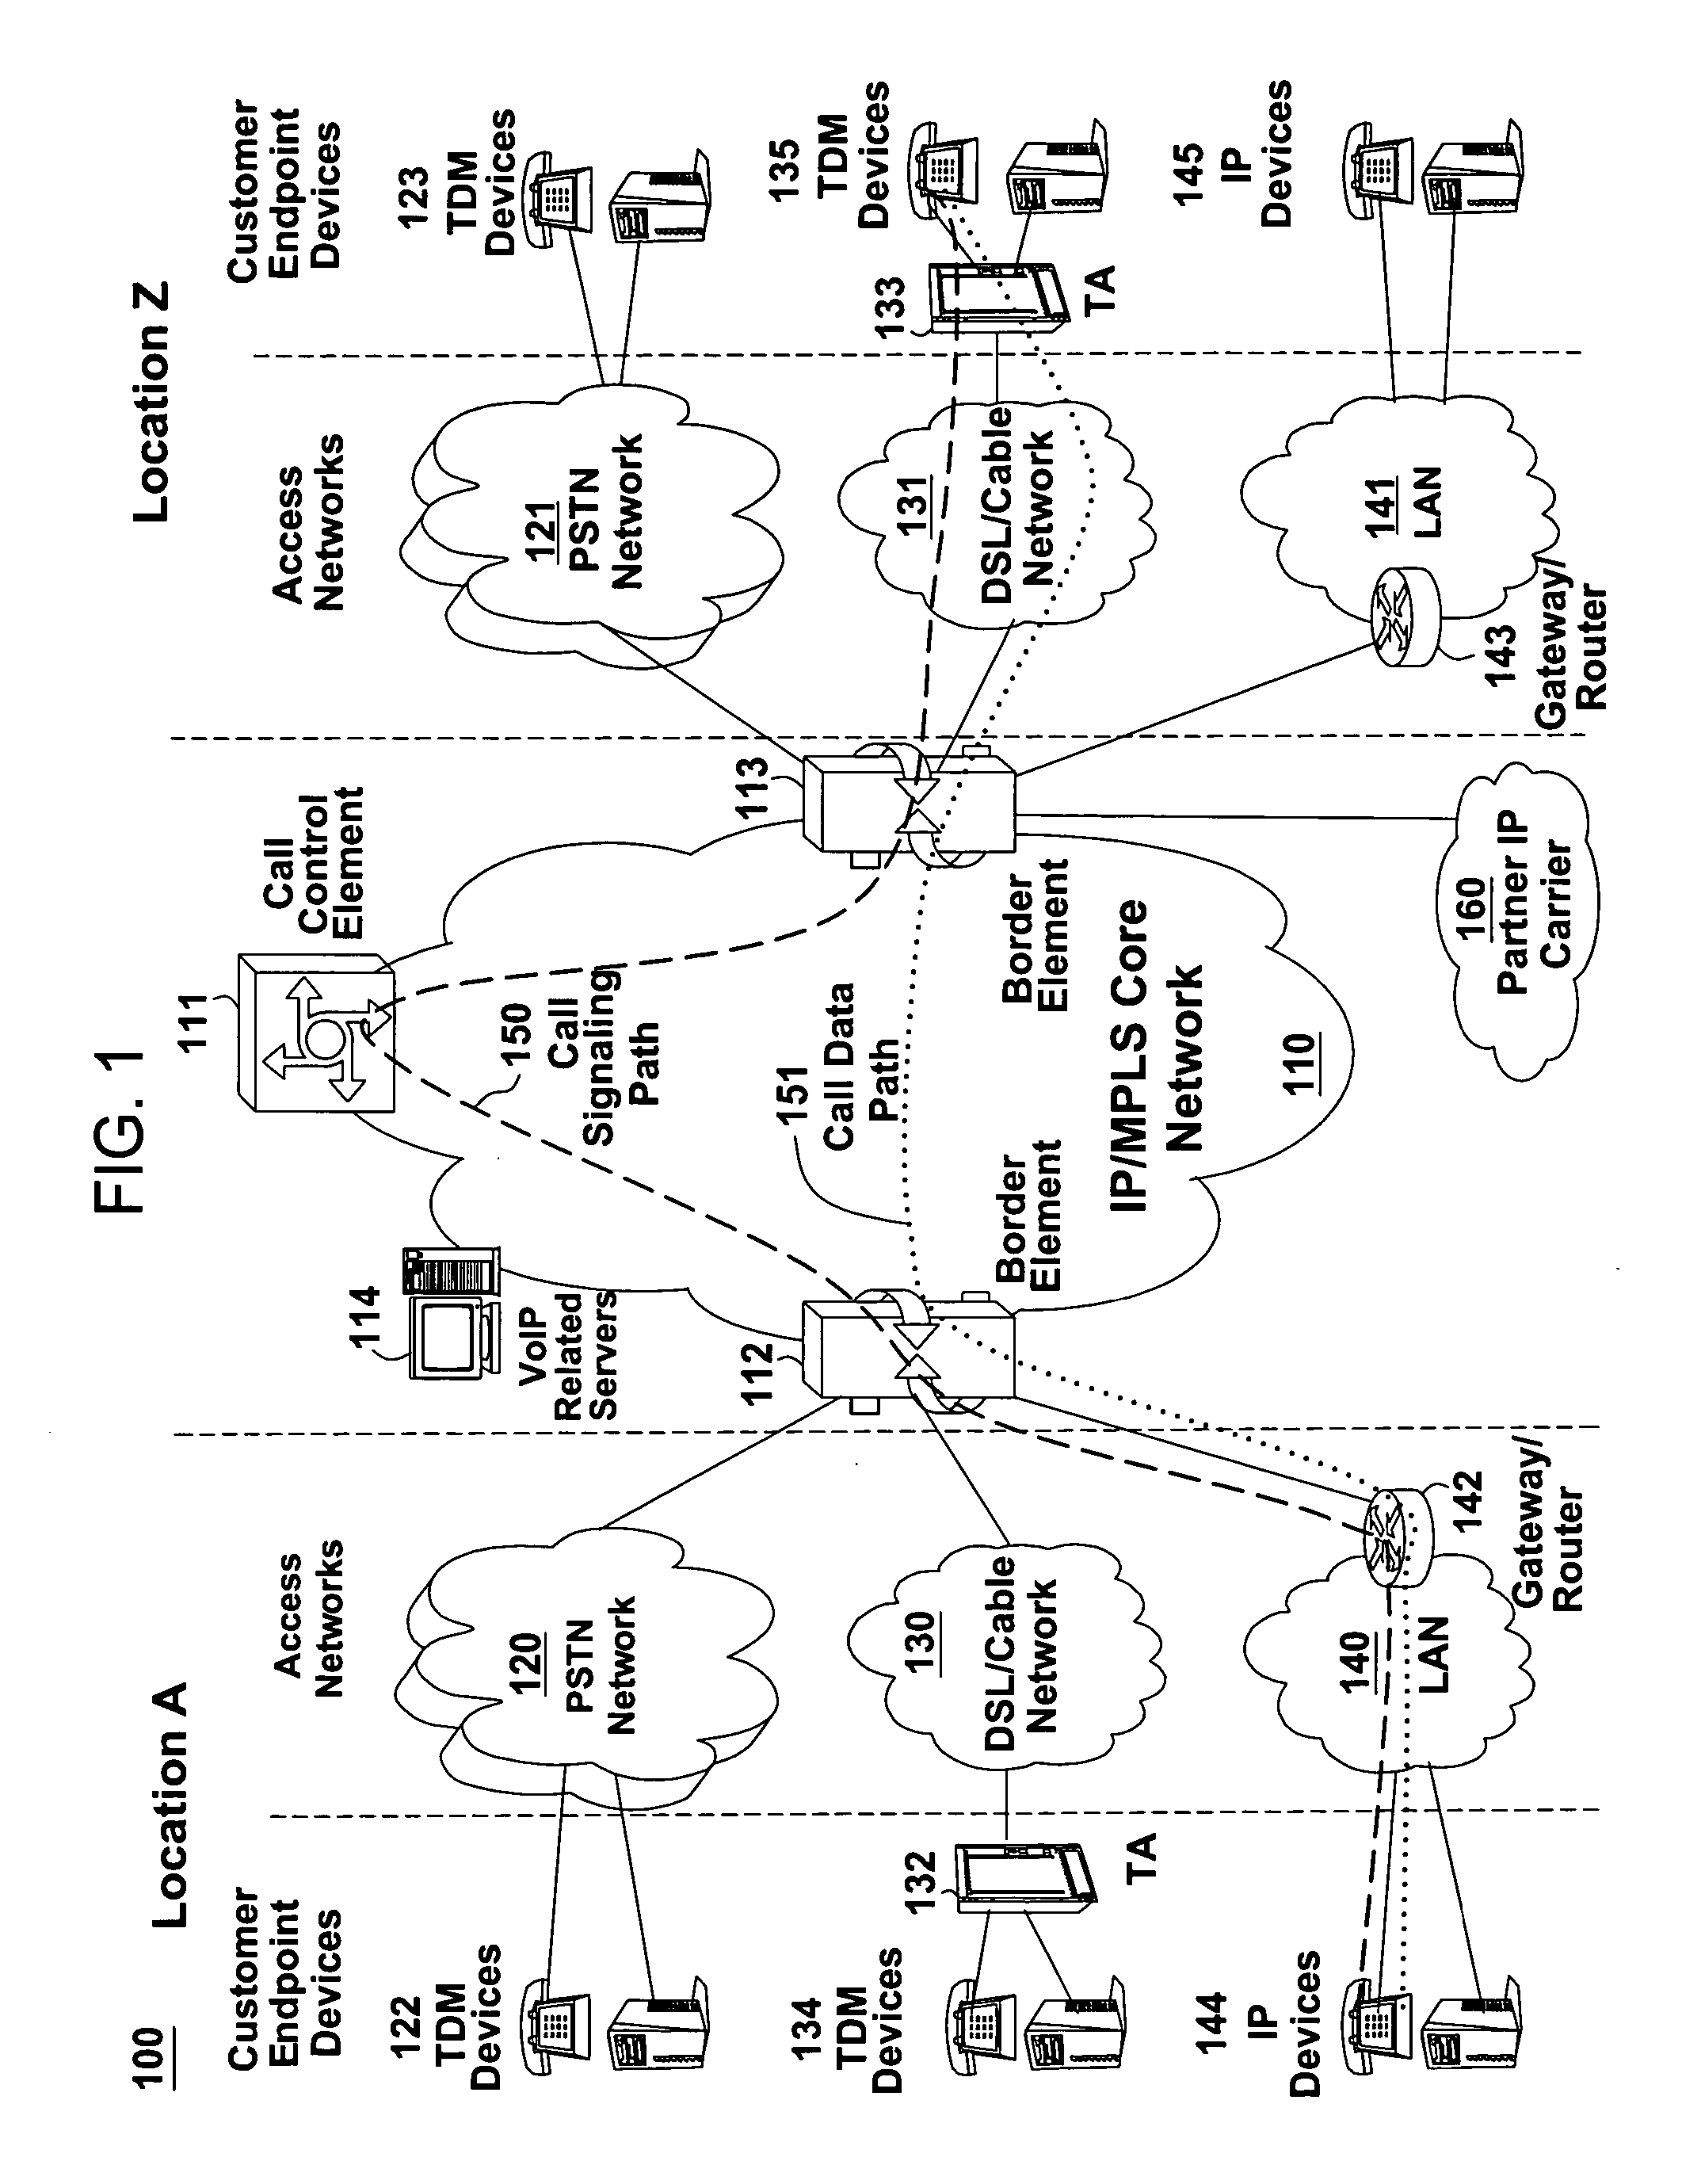 Method and apparatus for dynamically calculating the capacity of a packet network